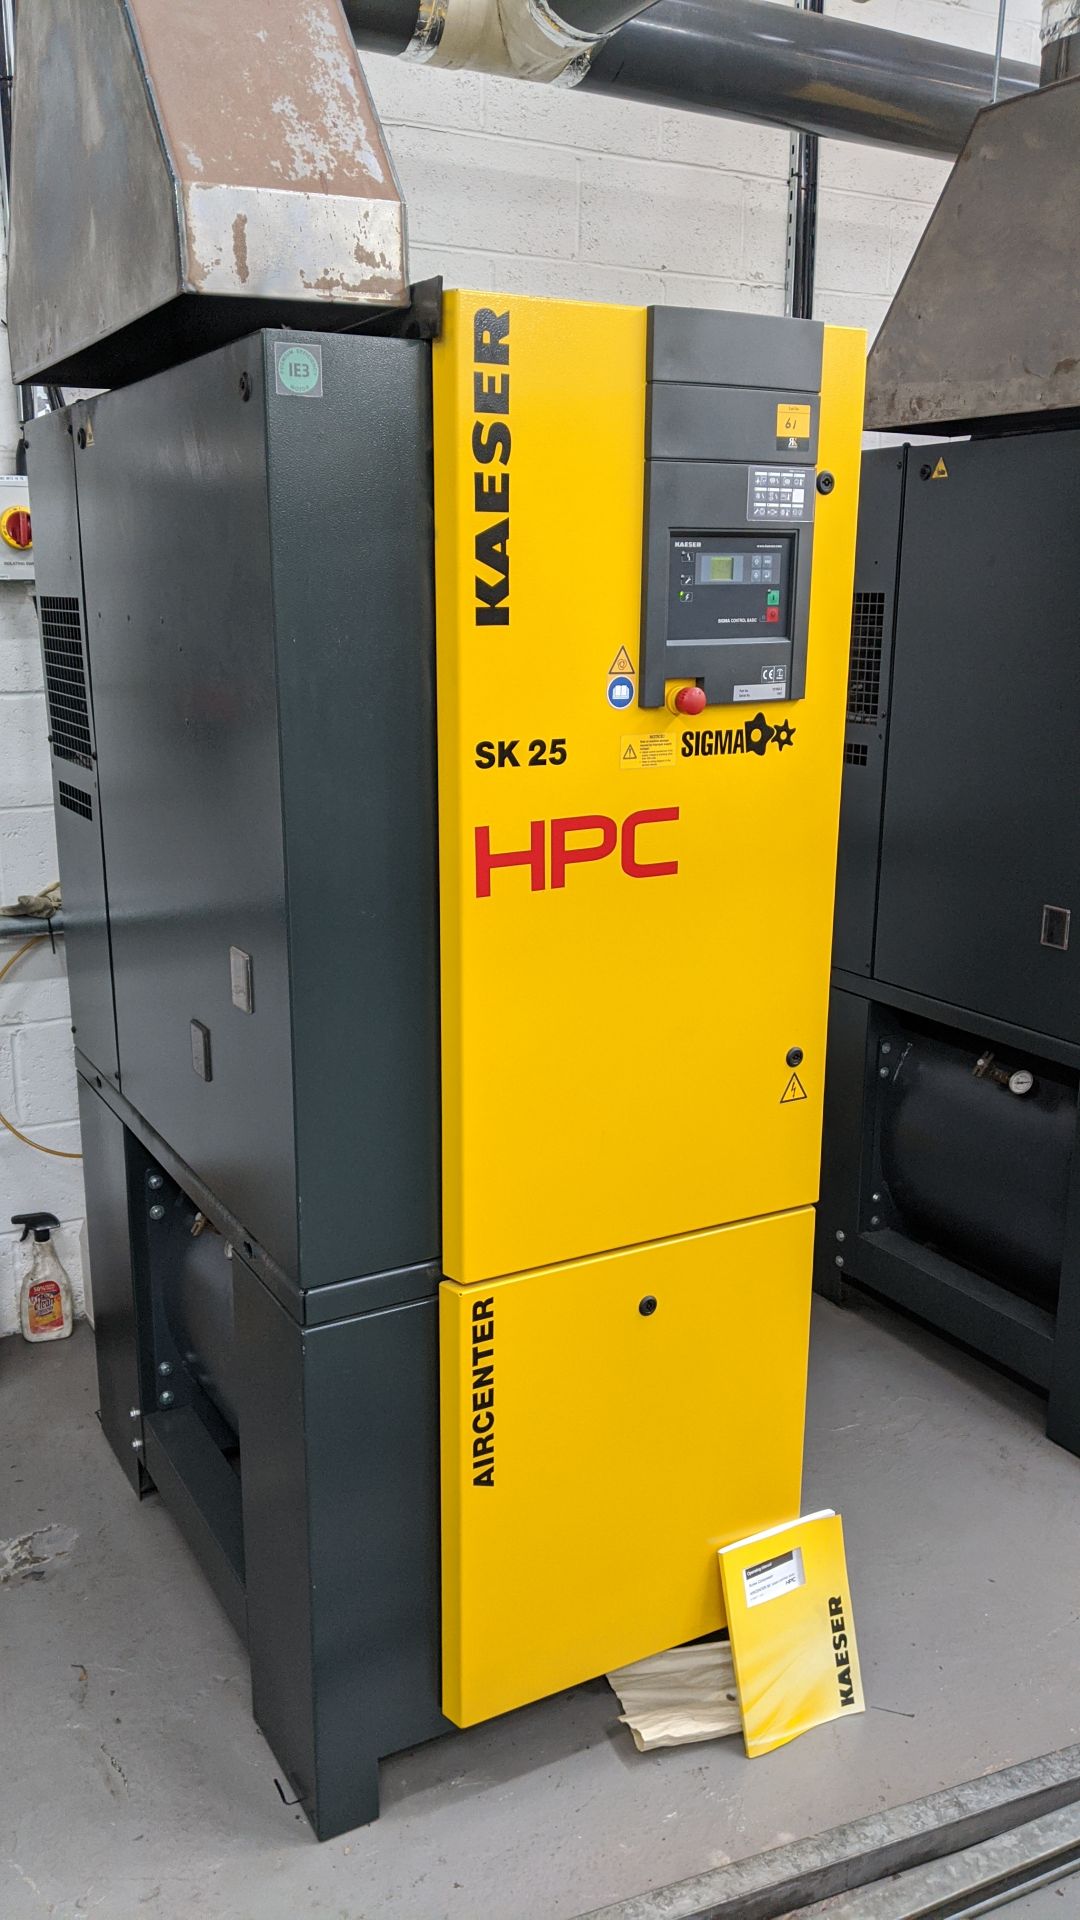 2014 Kaeser HPC Aircenter SK25 Sigma all-in-one floor standing screw compressor system, serial no. - Image 4 of 17